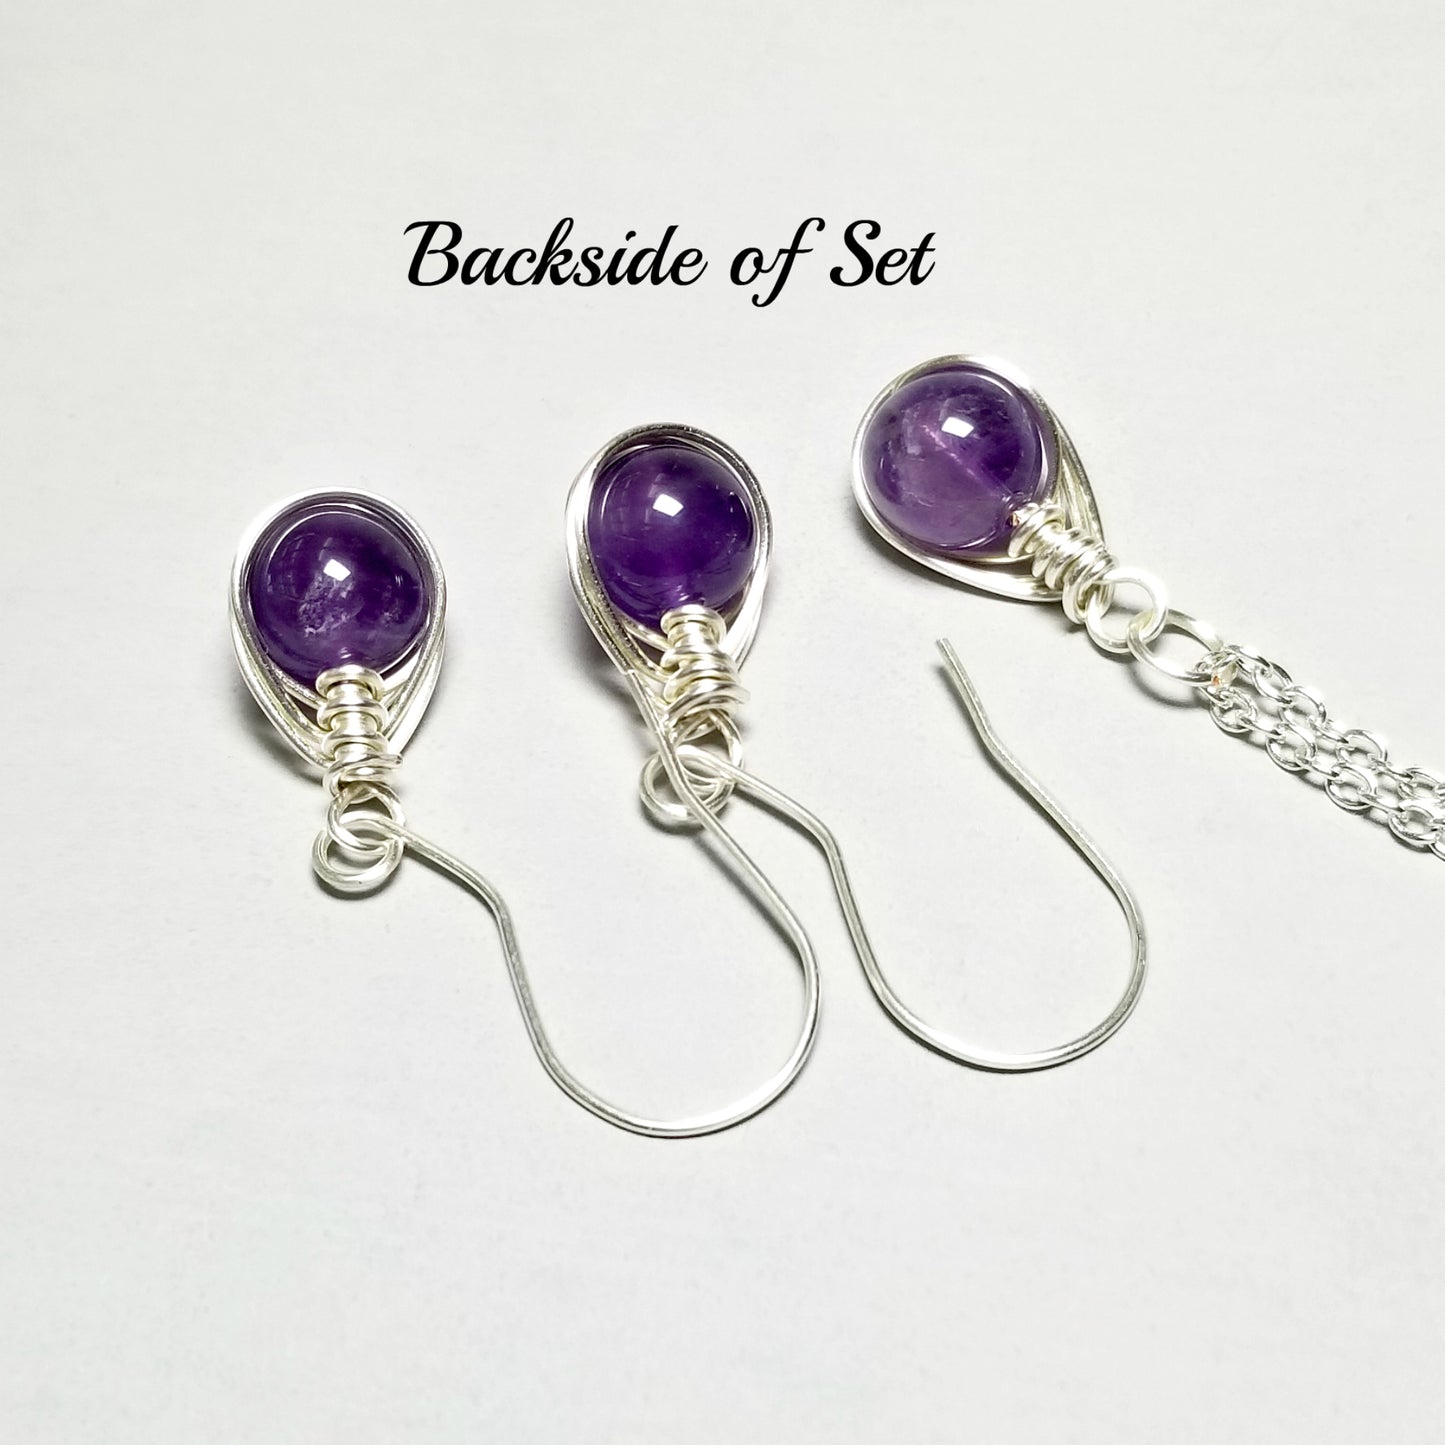 Matching Necklace Earrings Amethyst Jewelry Set